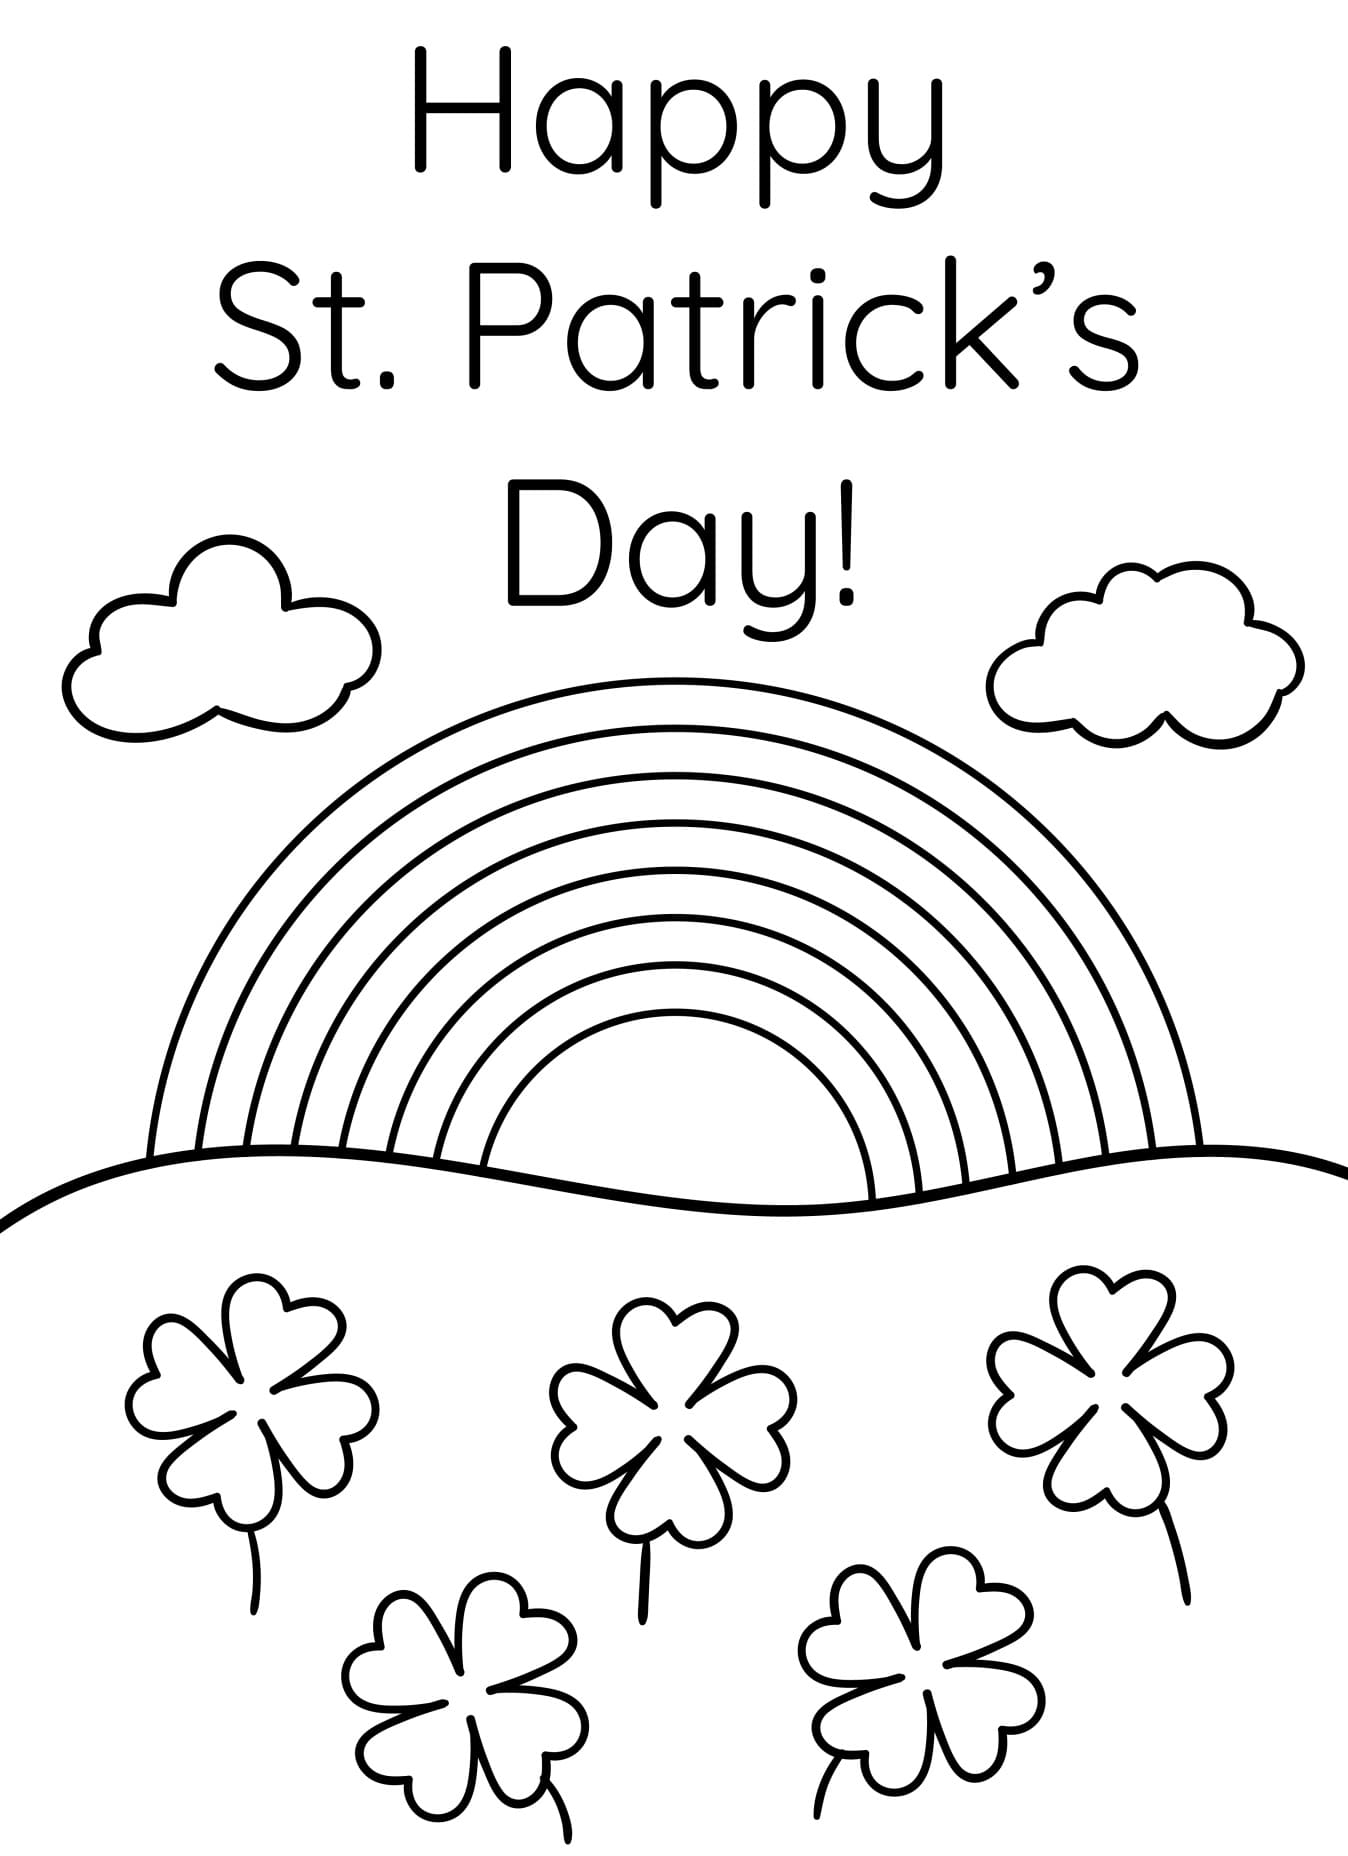 st-patrick-s-day-coloring-page-simple-mom-review